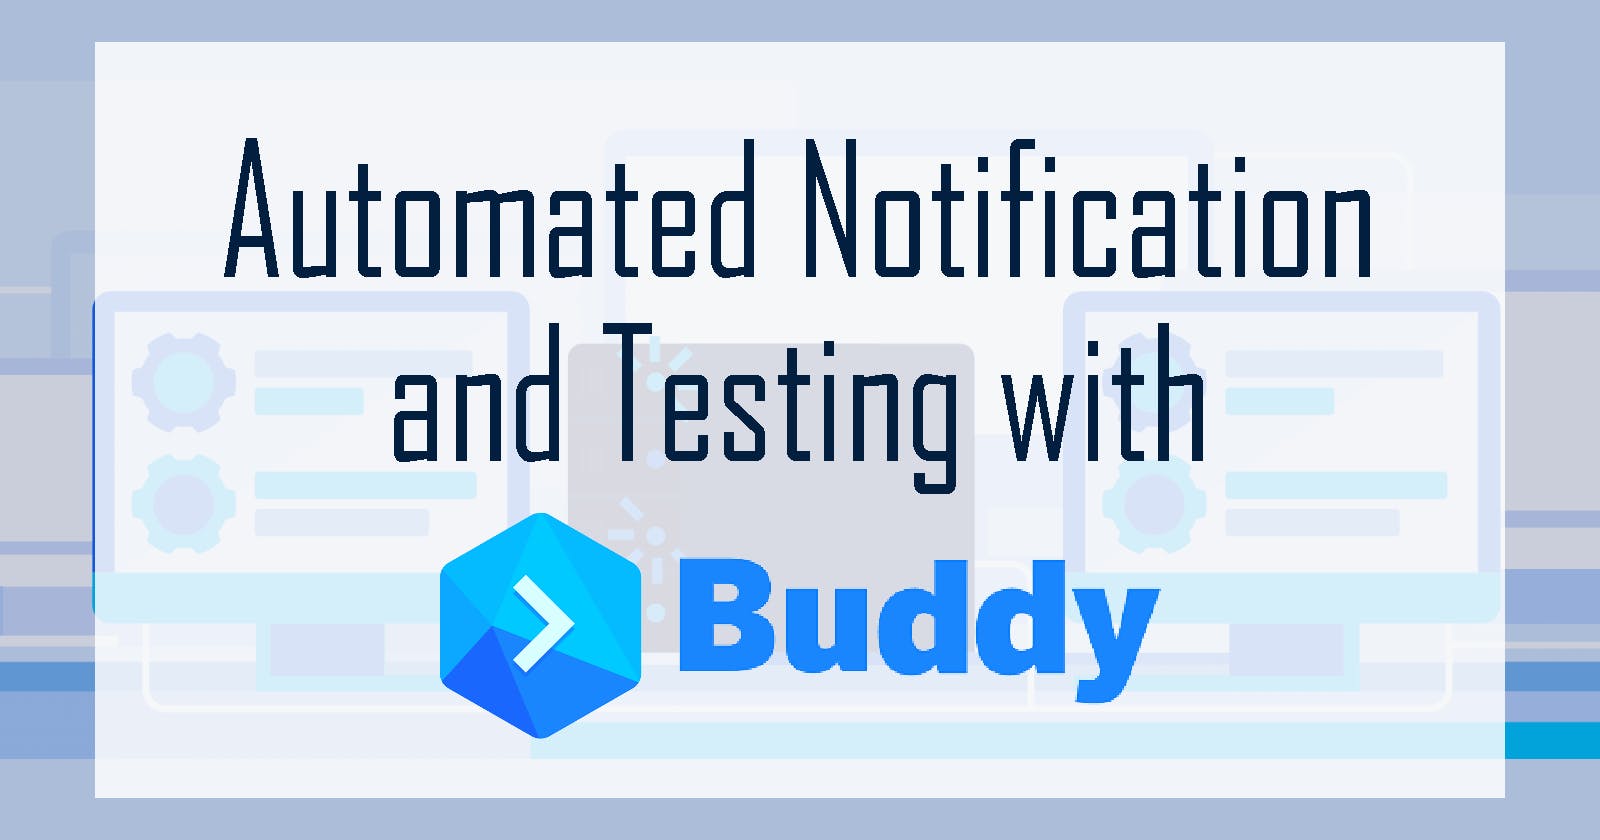 Automated Notification and Testing with Buddy